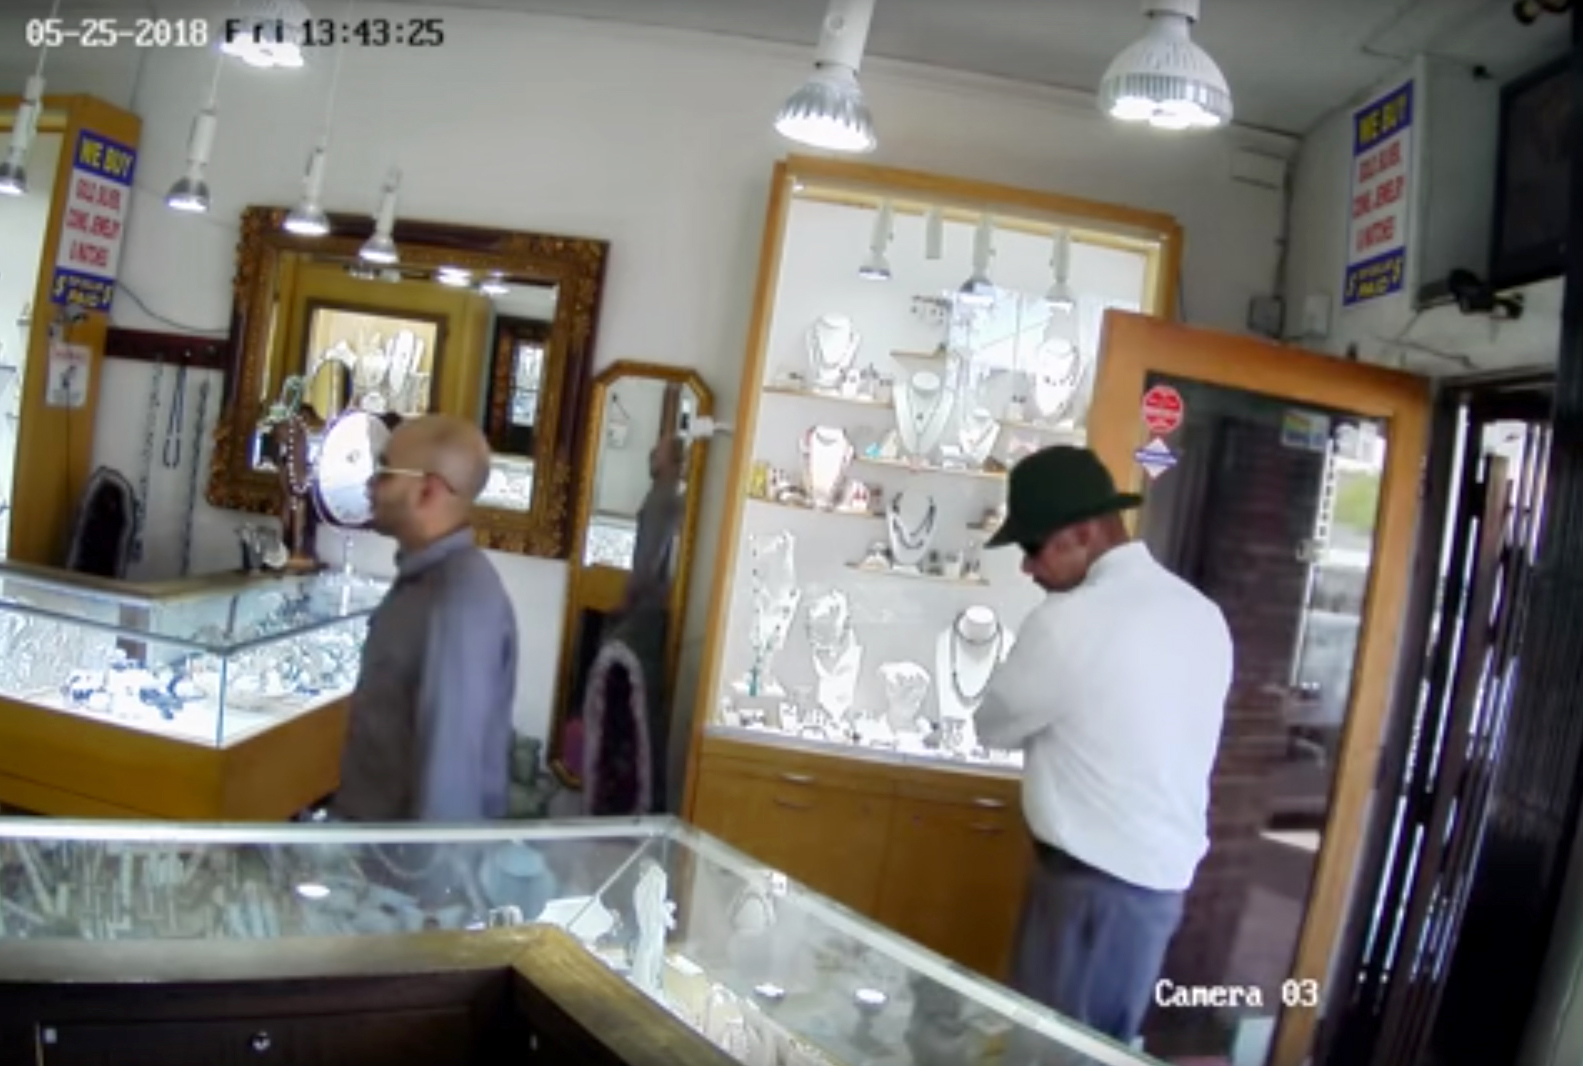 PHOTO: The Los Angeles Police Department has released surveillance footage of a May 25, 2018, attempted robbery in Studio City, Calif. in hopes the public can help identify the suspects.